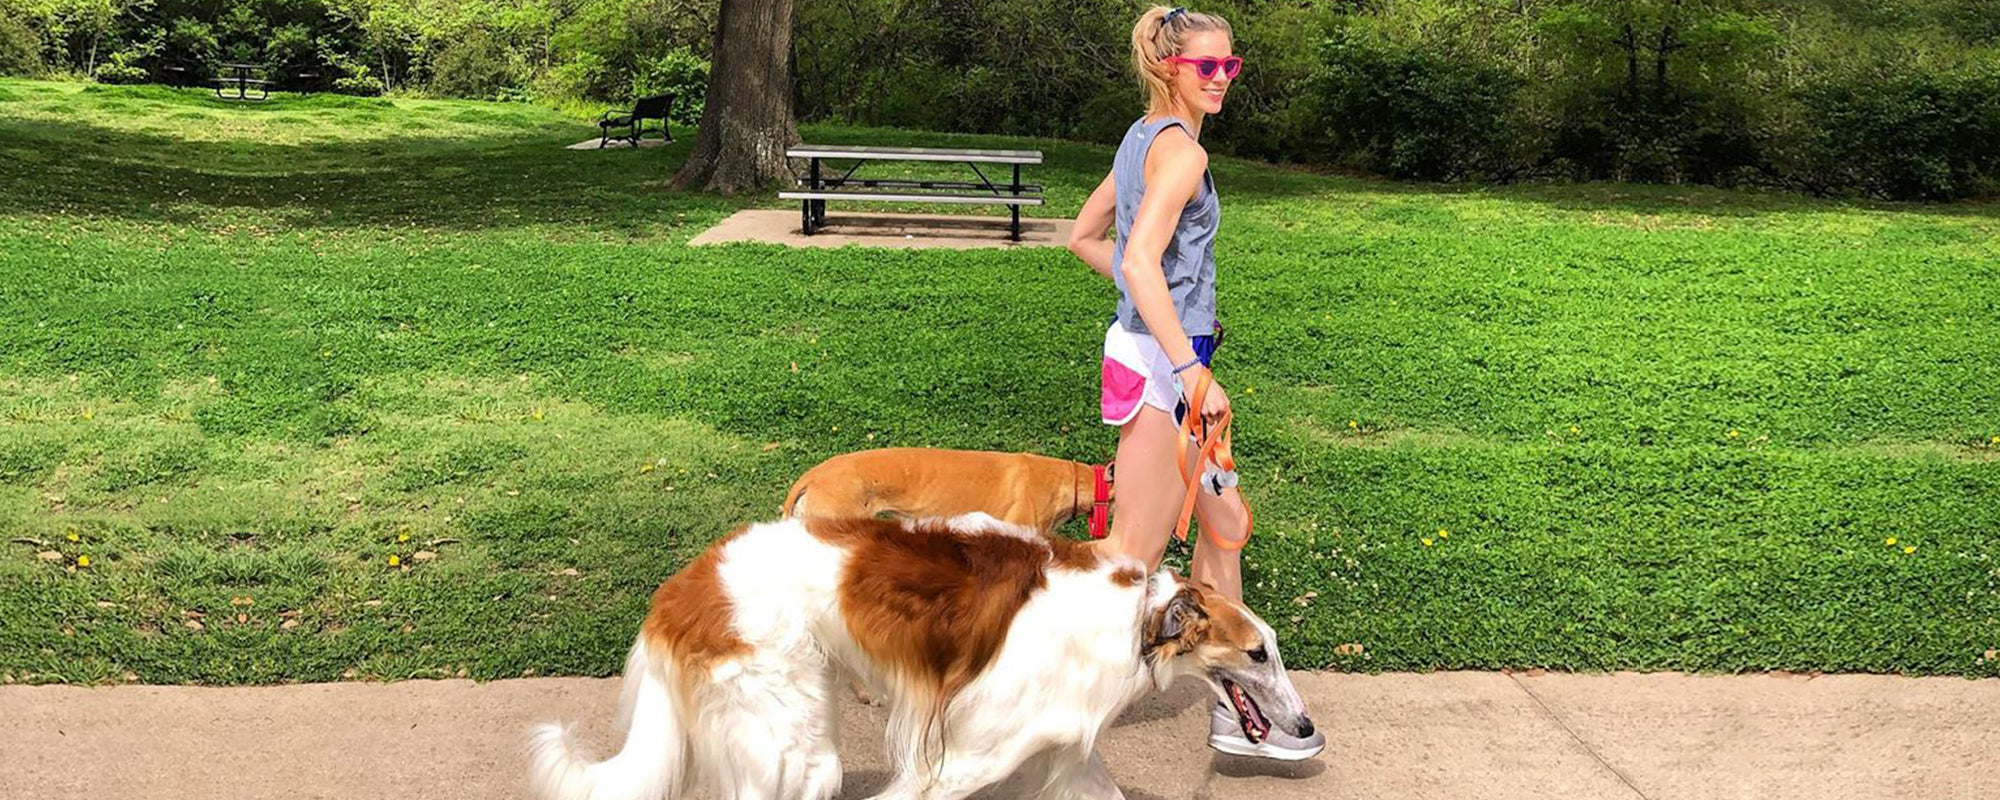 Top 5 Essentials for Running with Your Dog